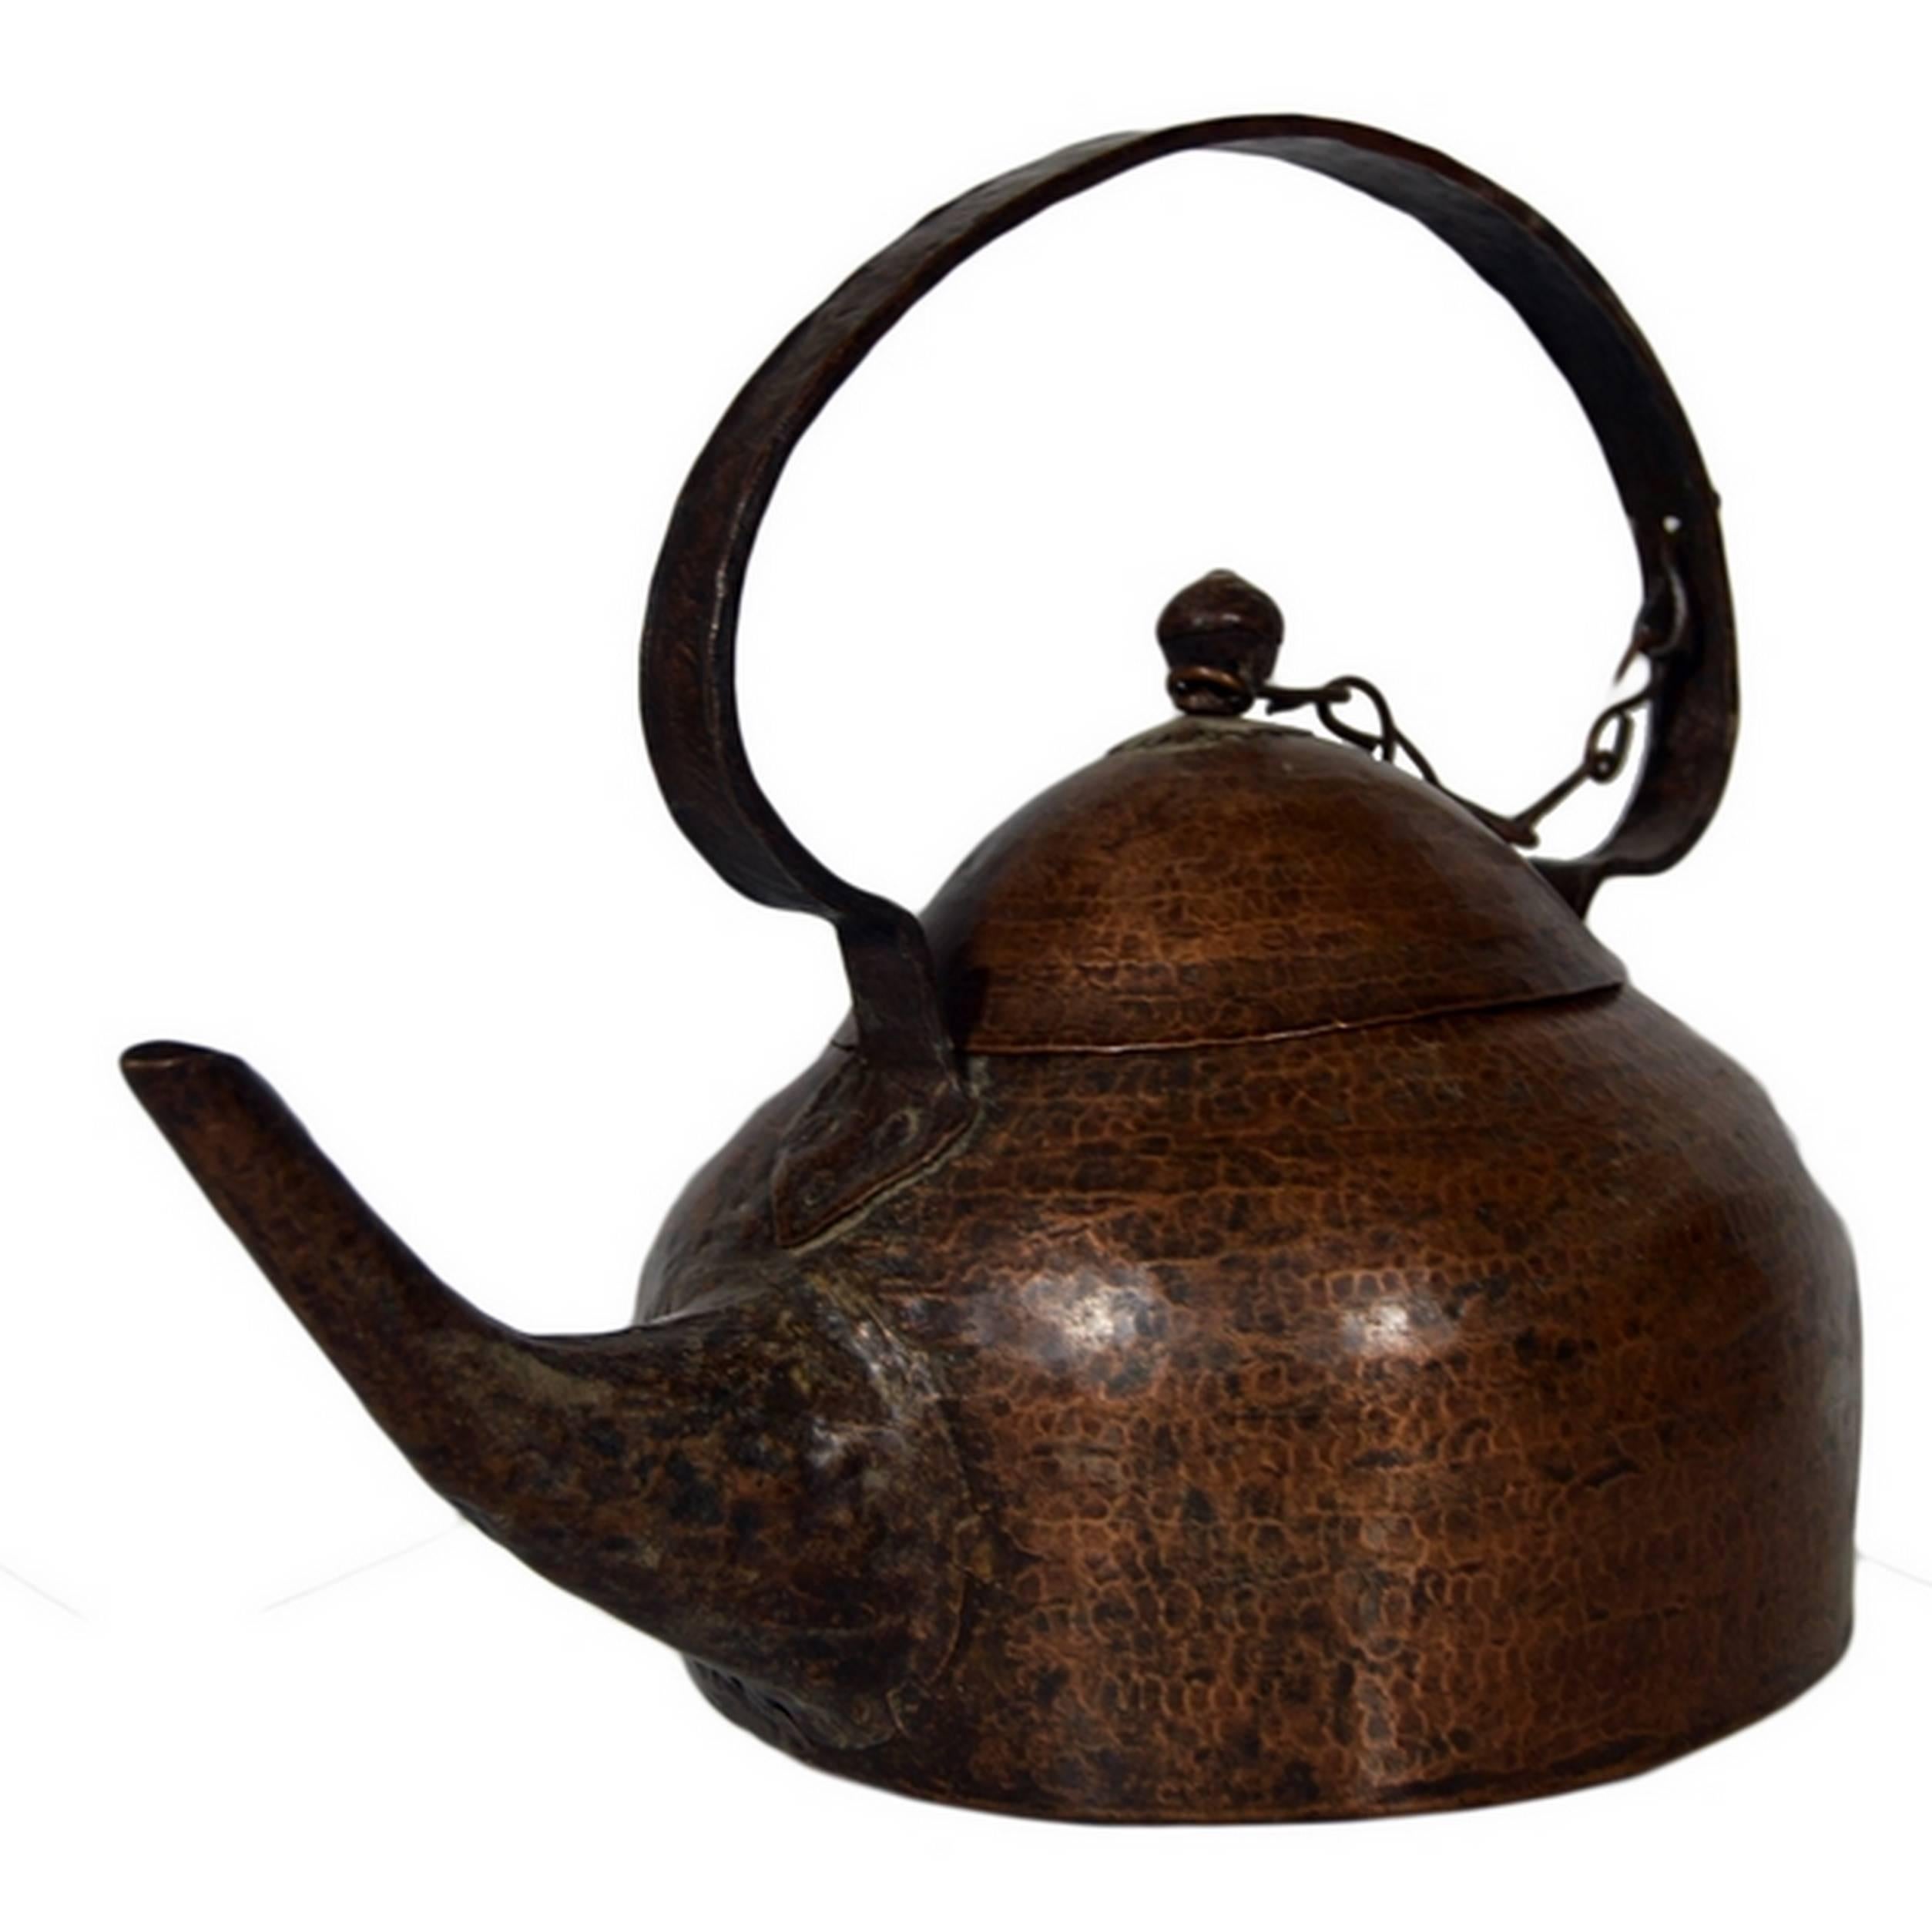 A vintage 1930s teapot from India where it was hand-hammered on copper which displays time’s patina. This teapot adopts a pleasant pyramid shape with a long spout and a tall round riveted handle. The round handle of the conic lid is tied to the